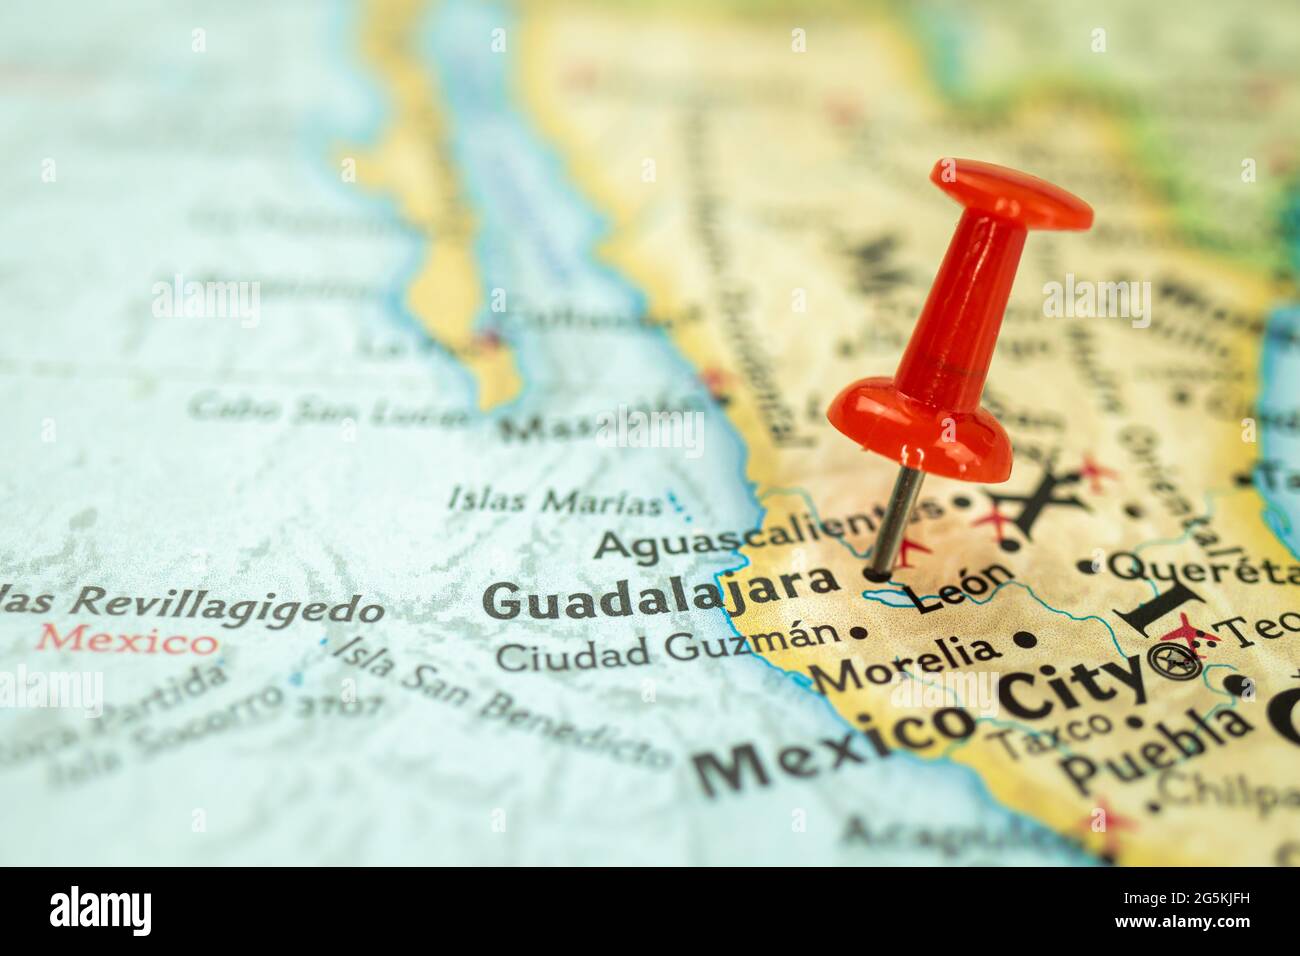 Location Guadalajara city in Mexico, map with red push pin pointing close up, North America Stock Photo